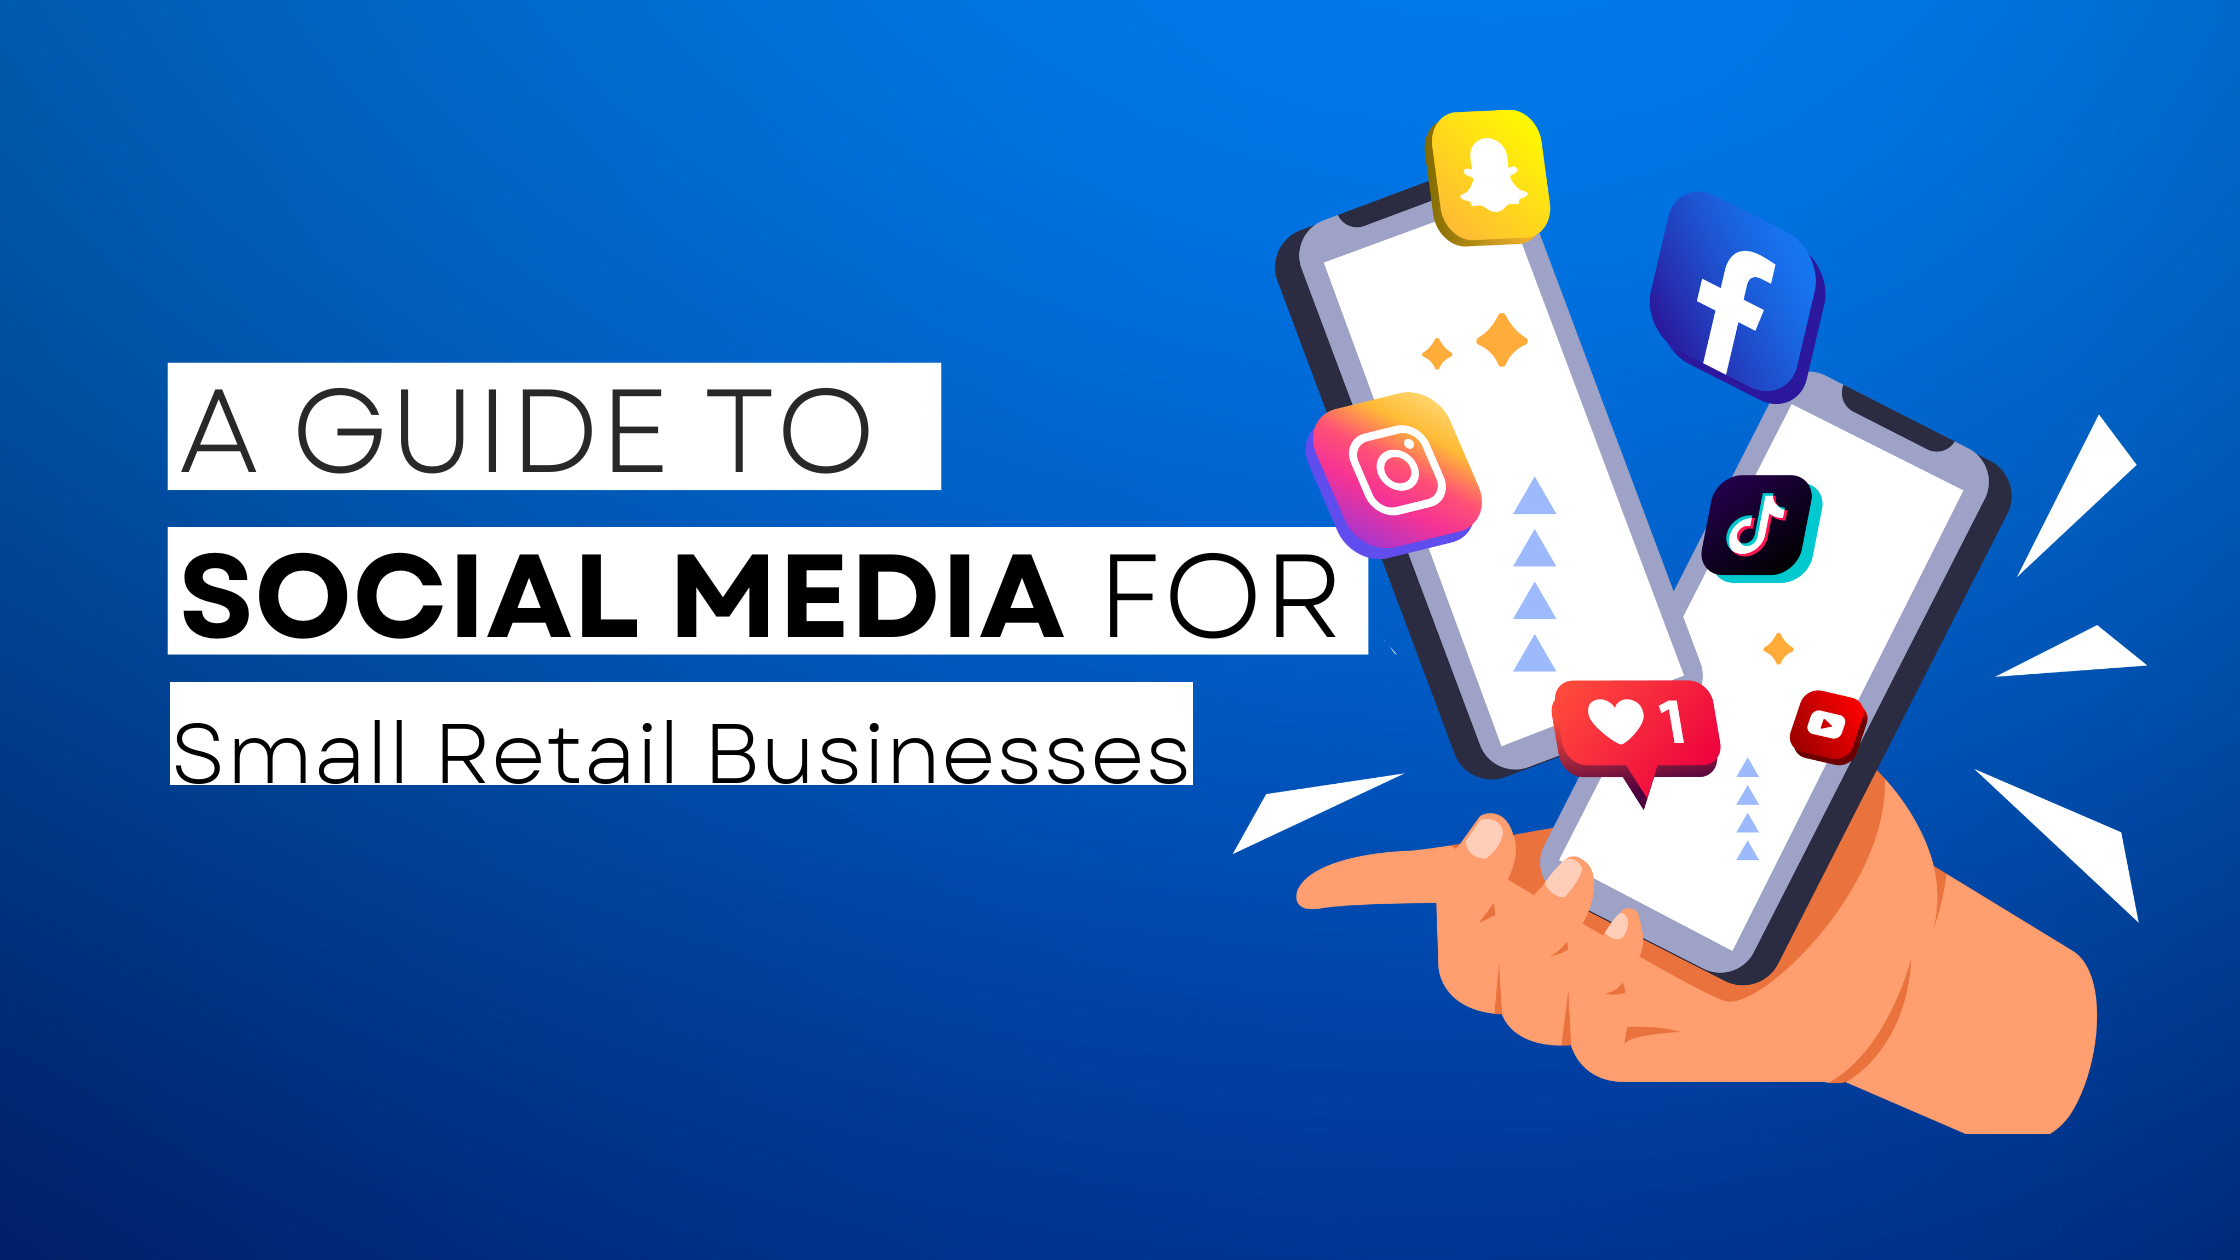 How to start Small Retail on social media